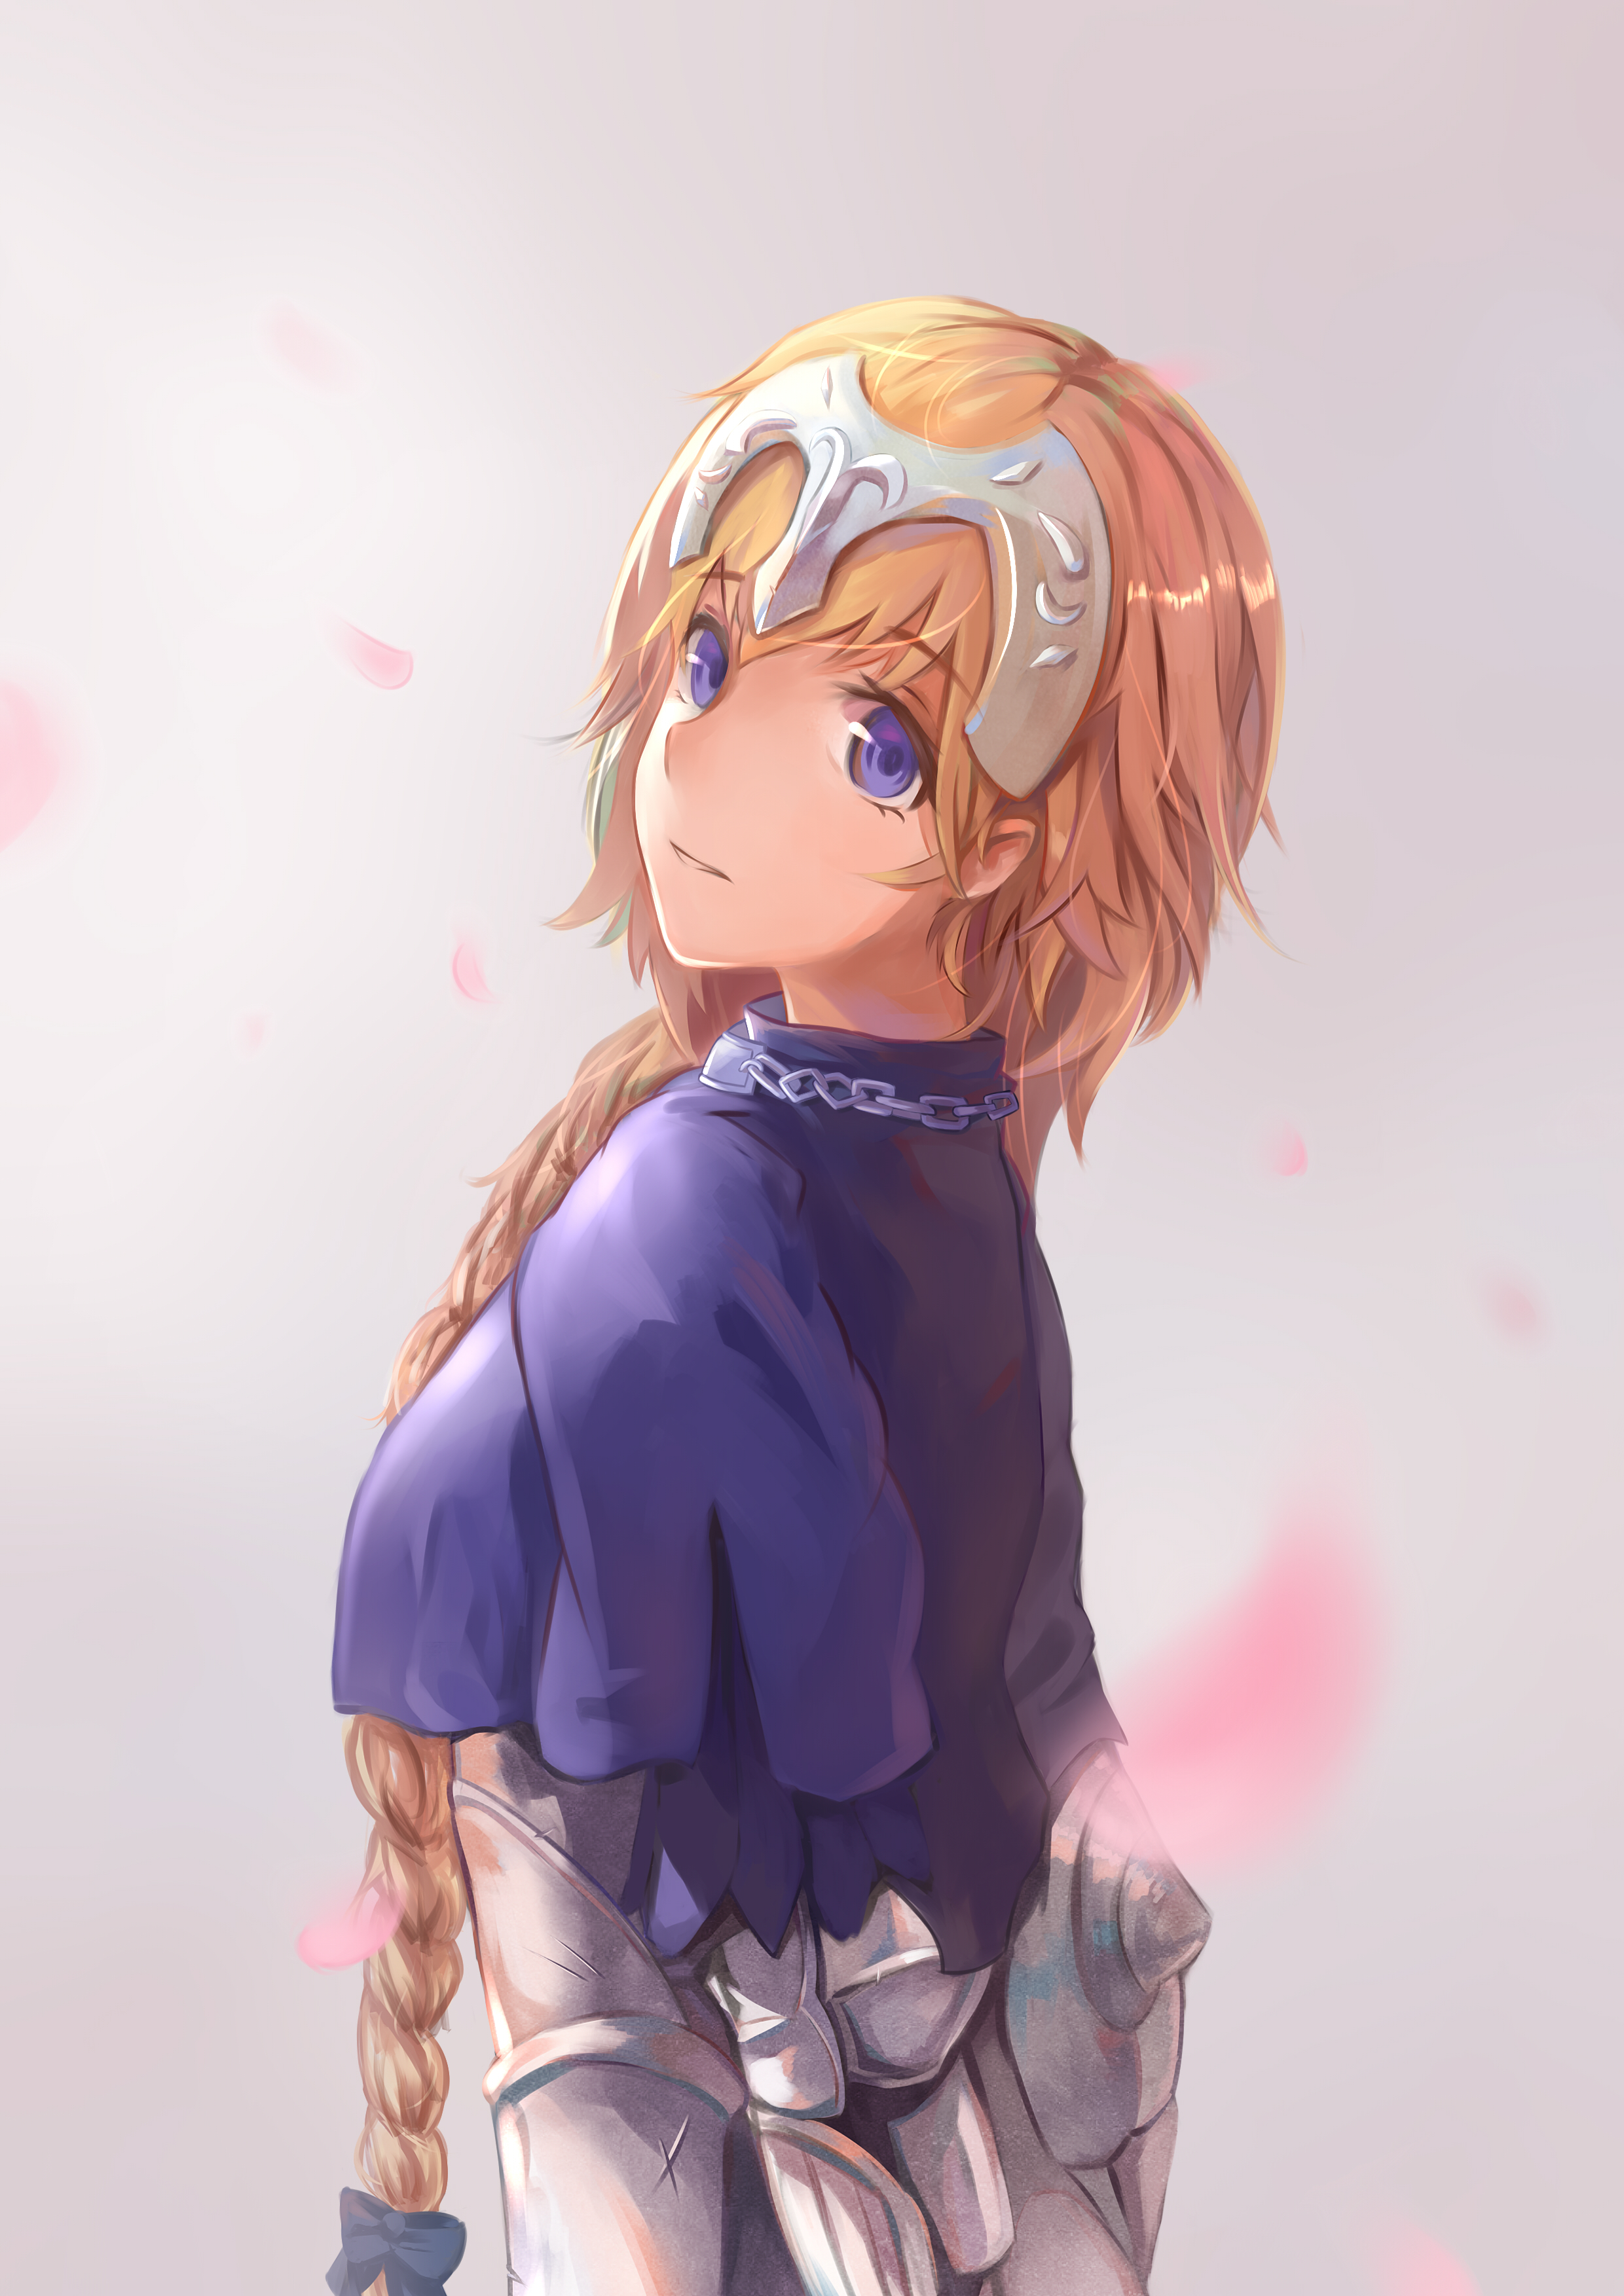 Fate Series Fate Apocrypha Anime Girls Ruler Fate Apocrypha Simple Background Blond Hair FGO 2D Jean 2480x3507